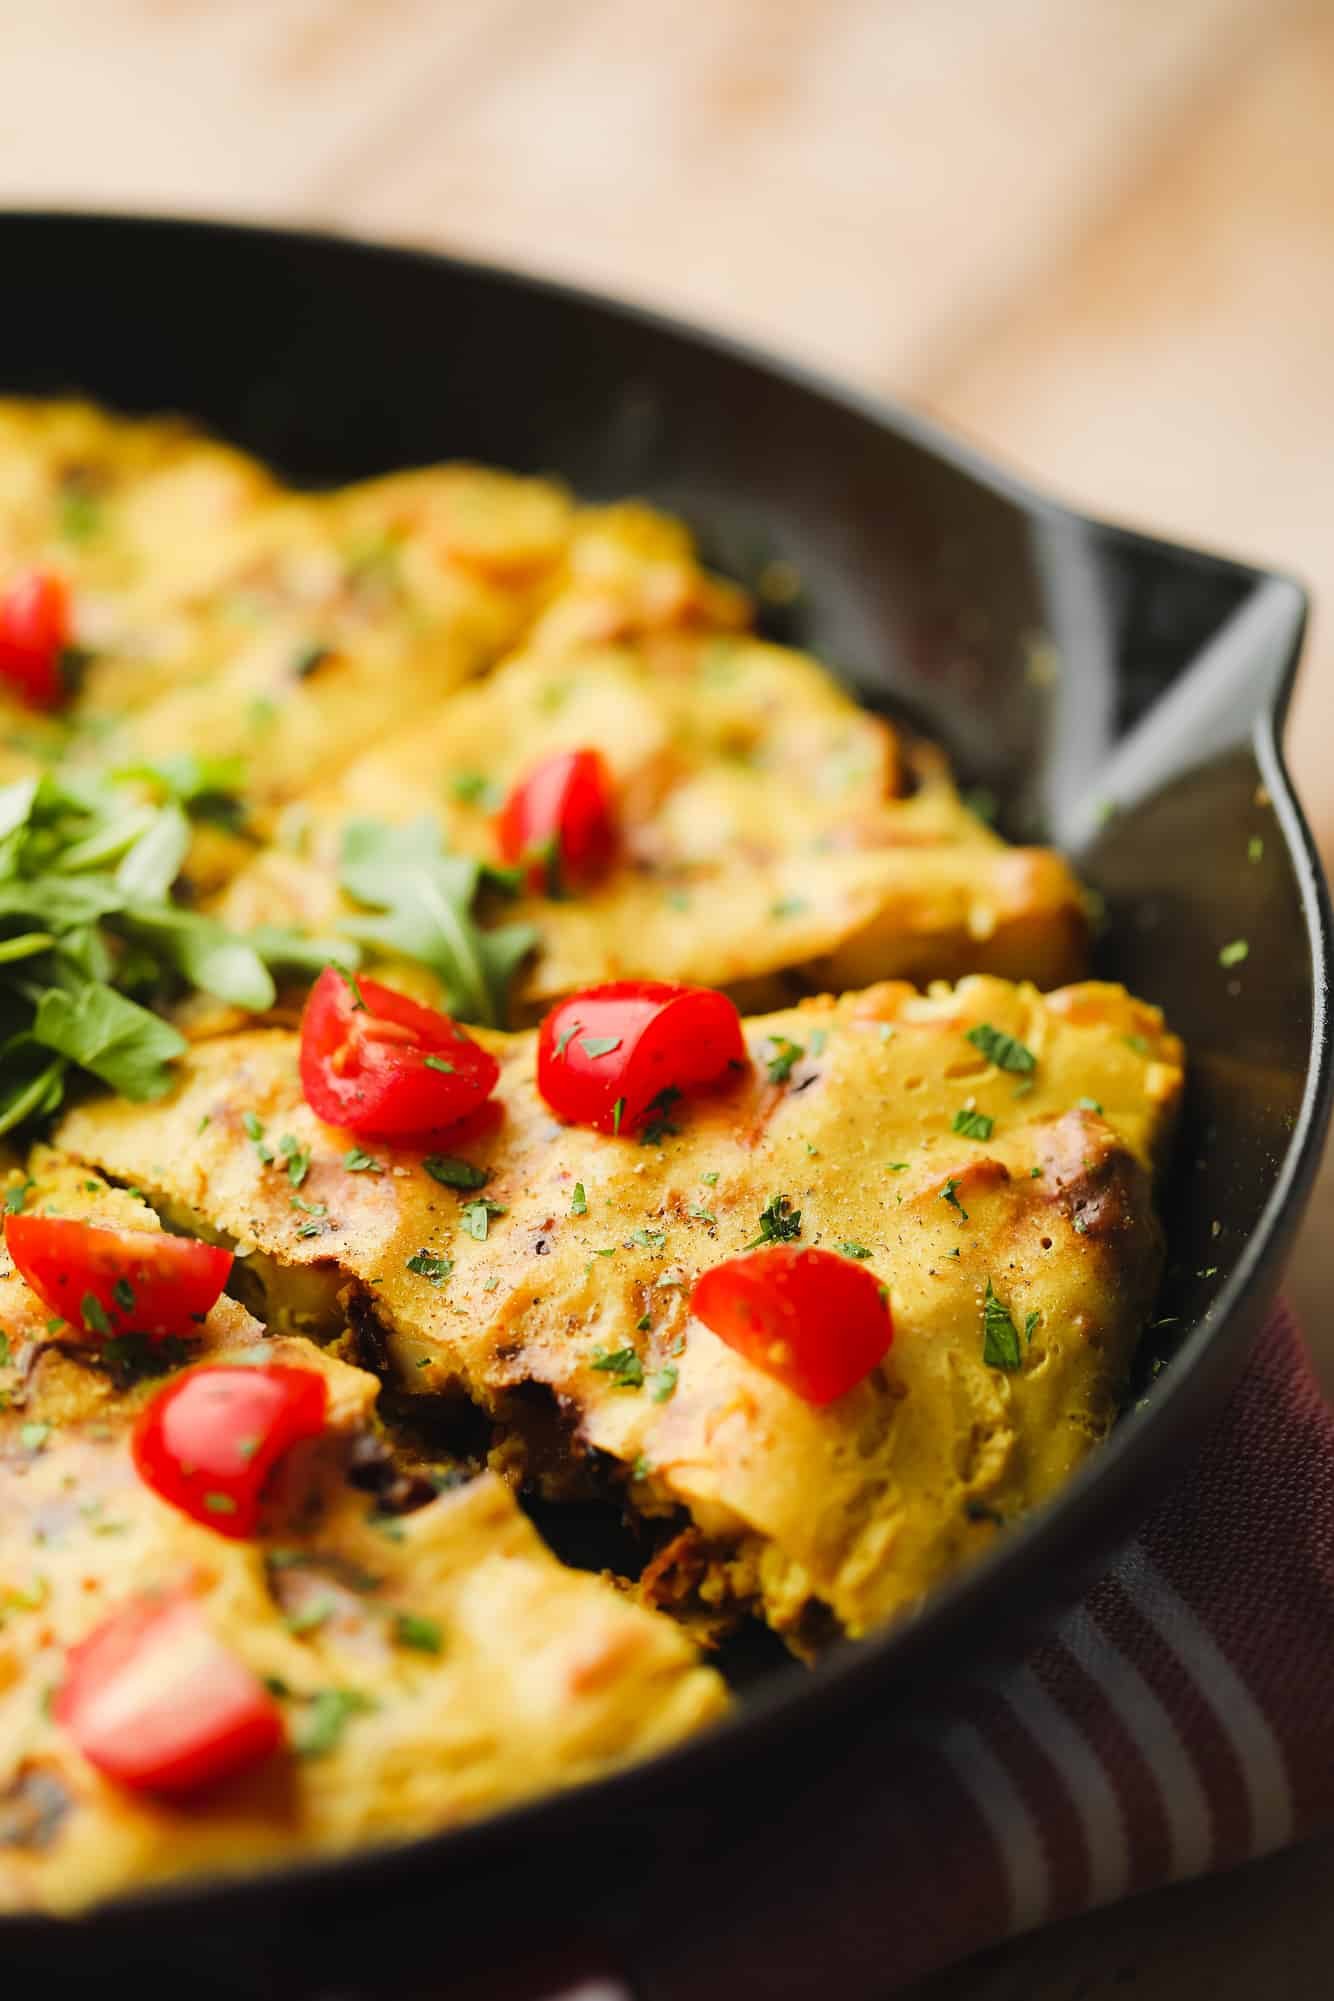 slices of a vegan frittata topped with sliced cherry tomatoes in a large black skillet.